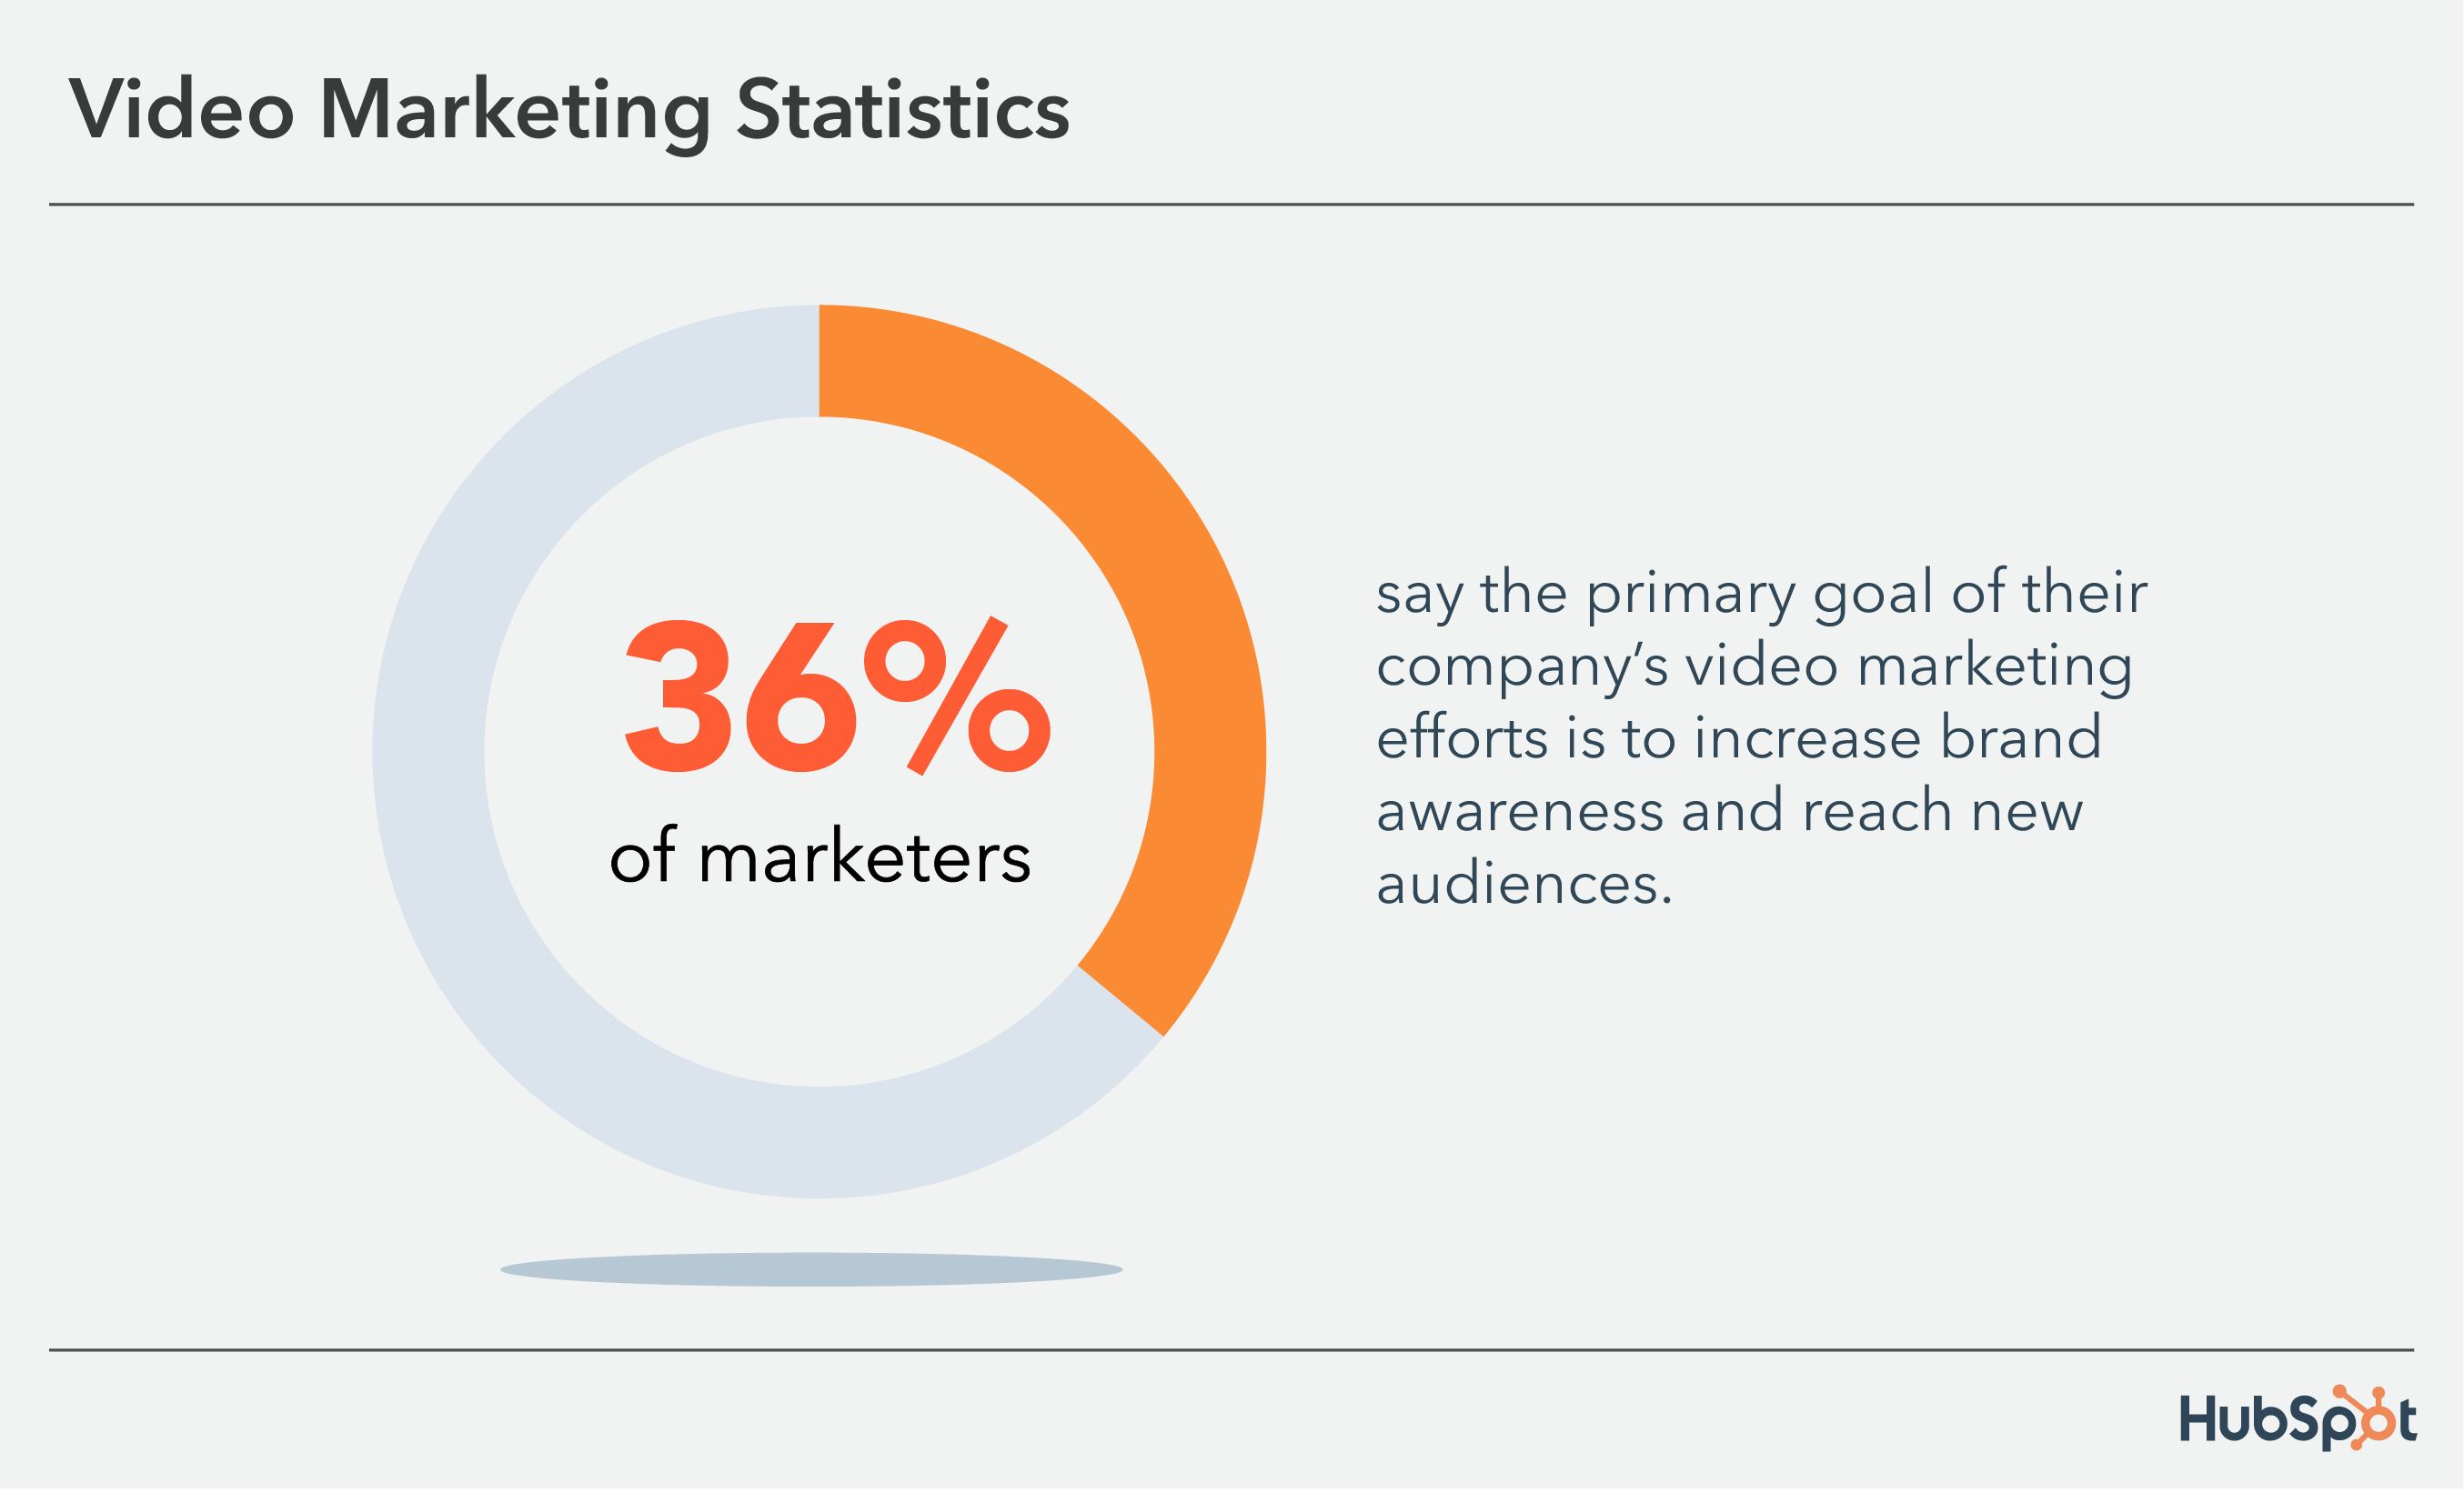 Video Marketing Statistics: 36% of marketers use video marketing to increase brand awareness.